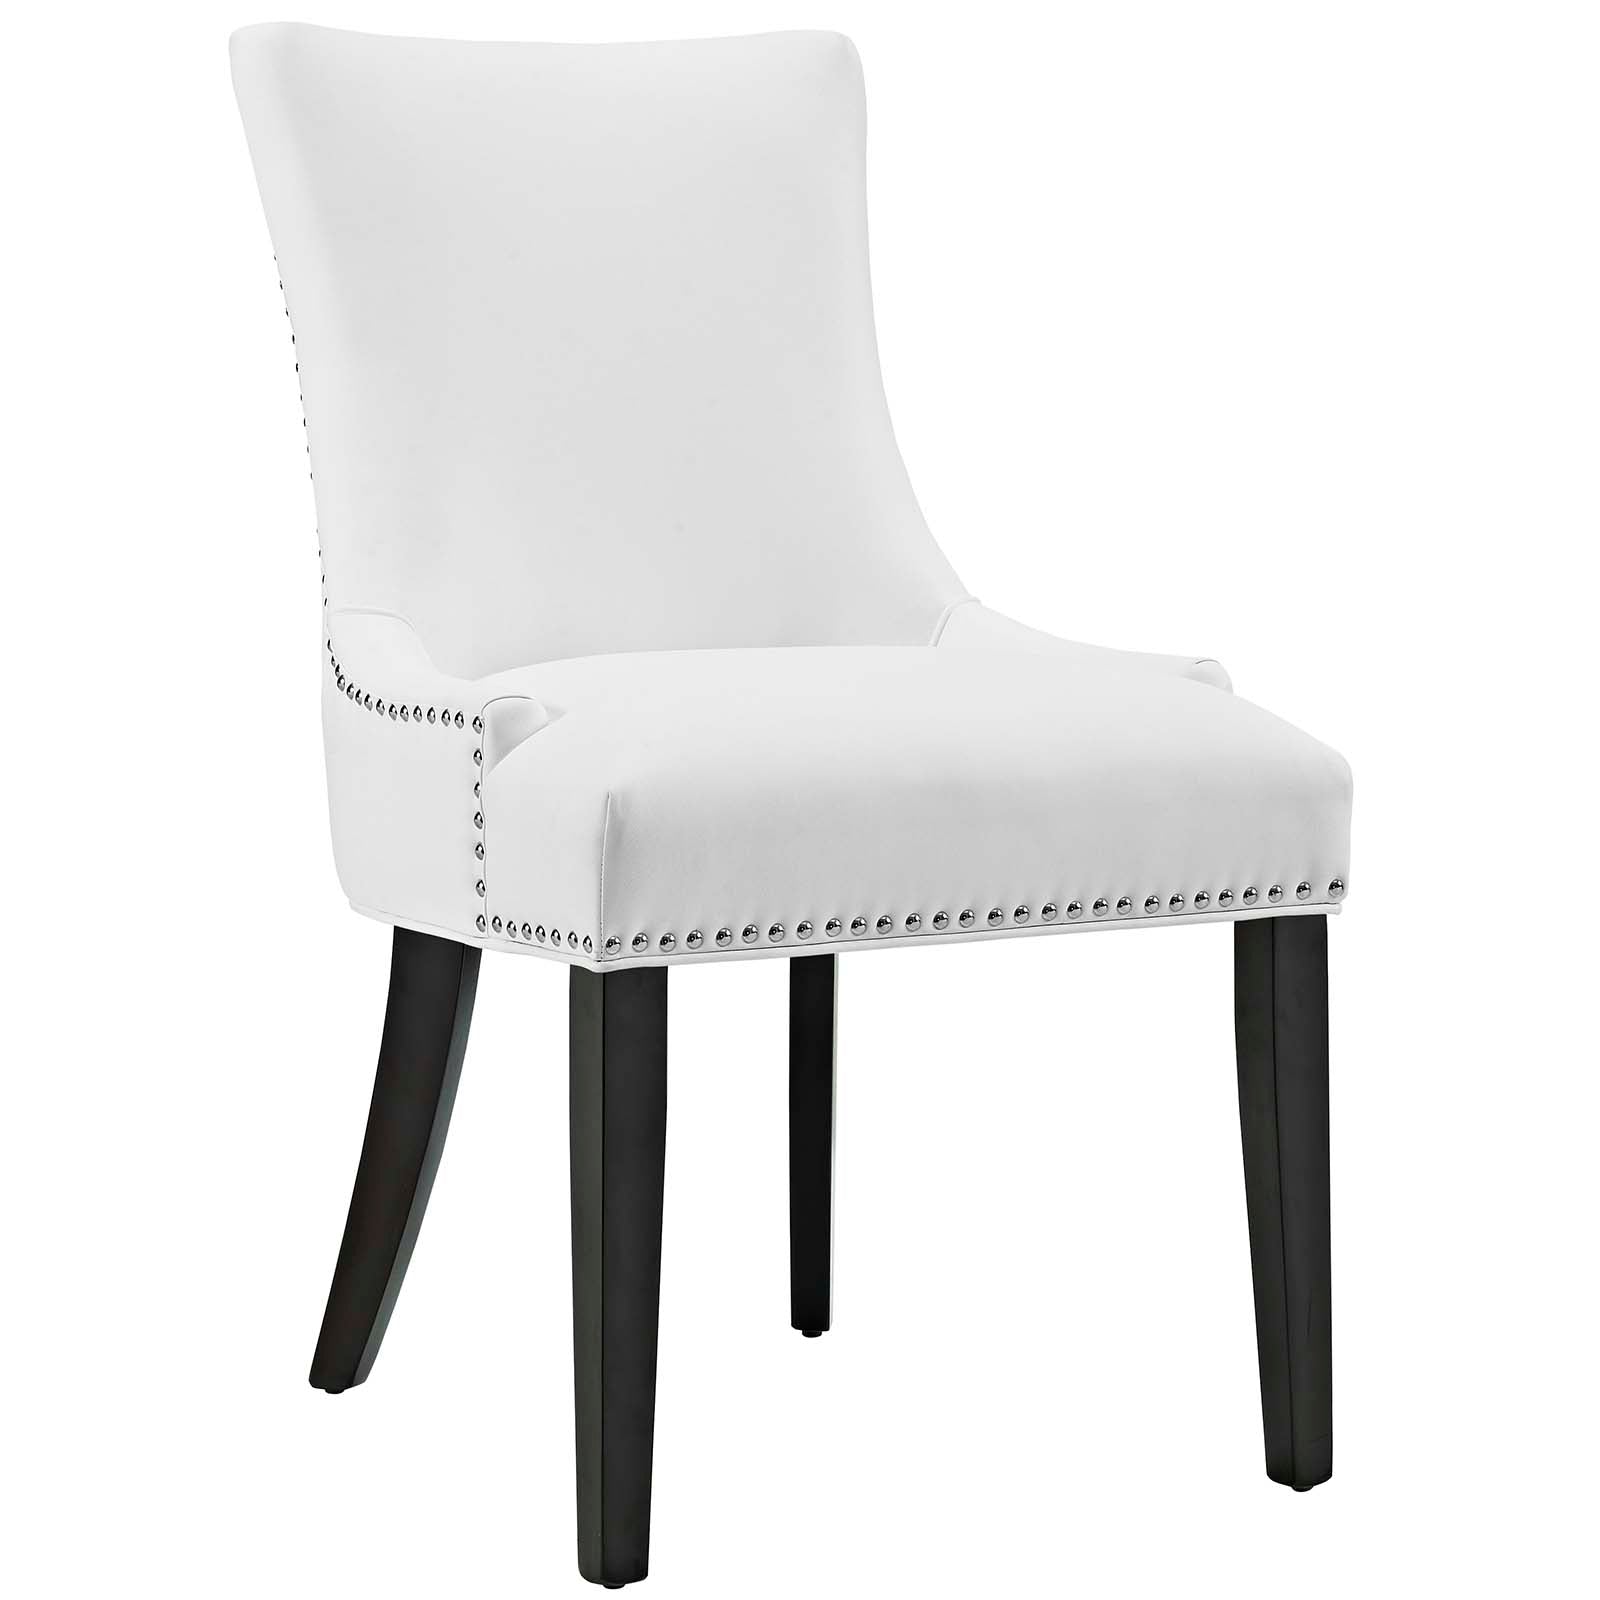 Modway Dining Chairs - Marquis Dining Chair Faux Leather Set of 4 White